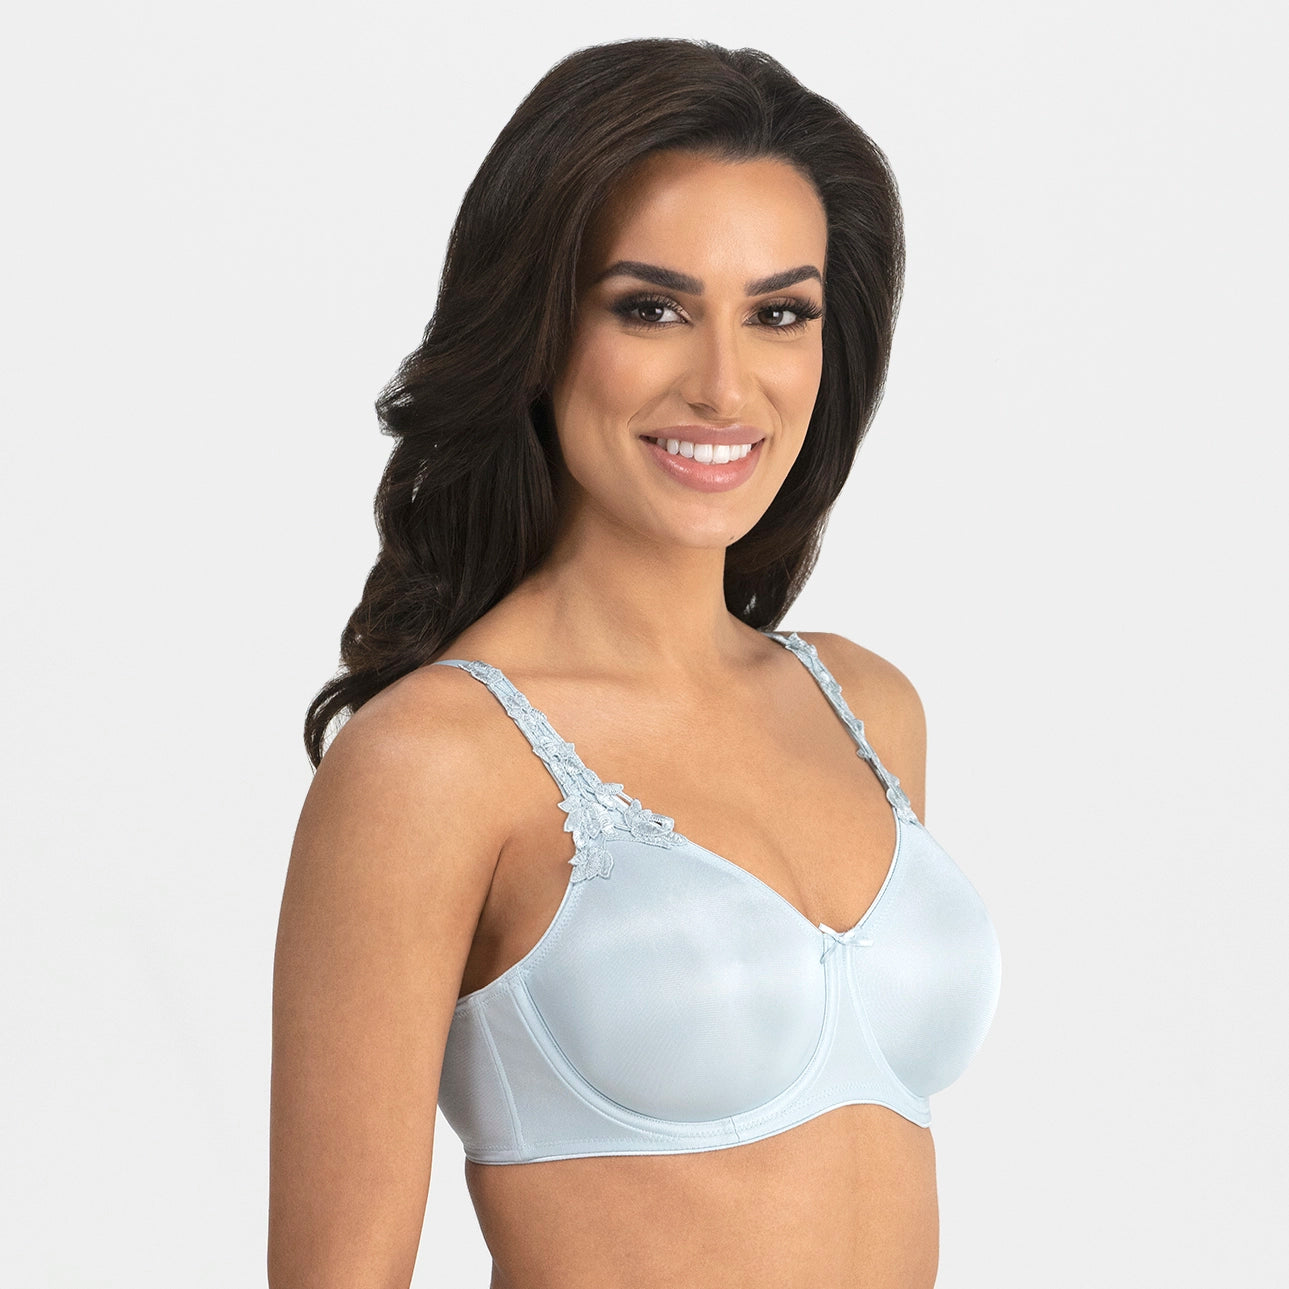 LAVINIA BRAS - Find Your Perfect Fit